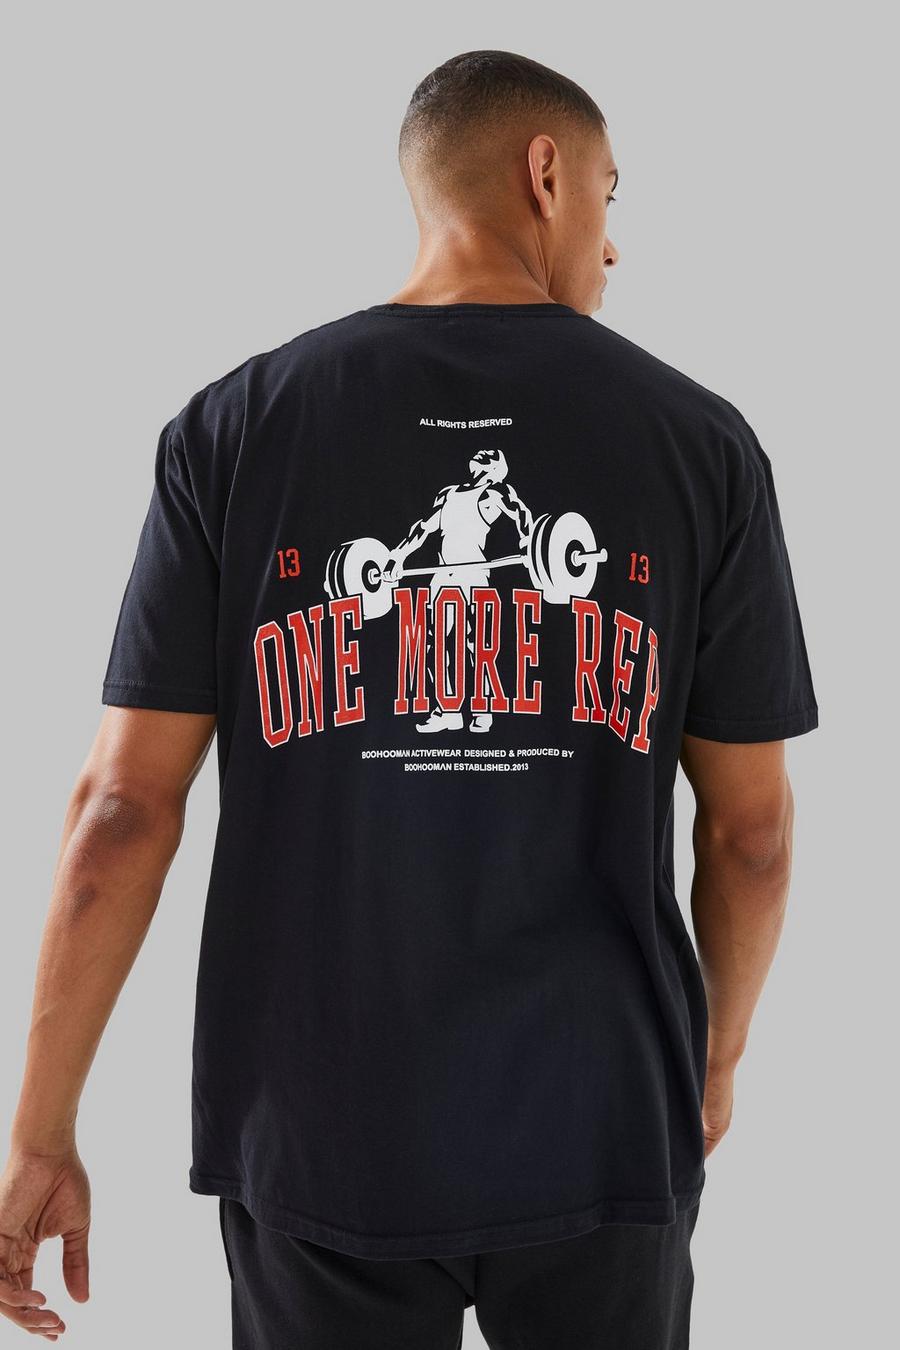 Black Man Active Oversized One More Rep T-shirt